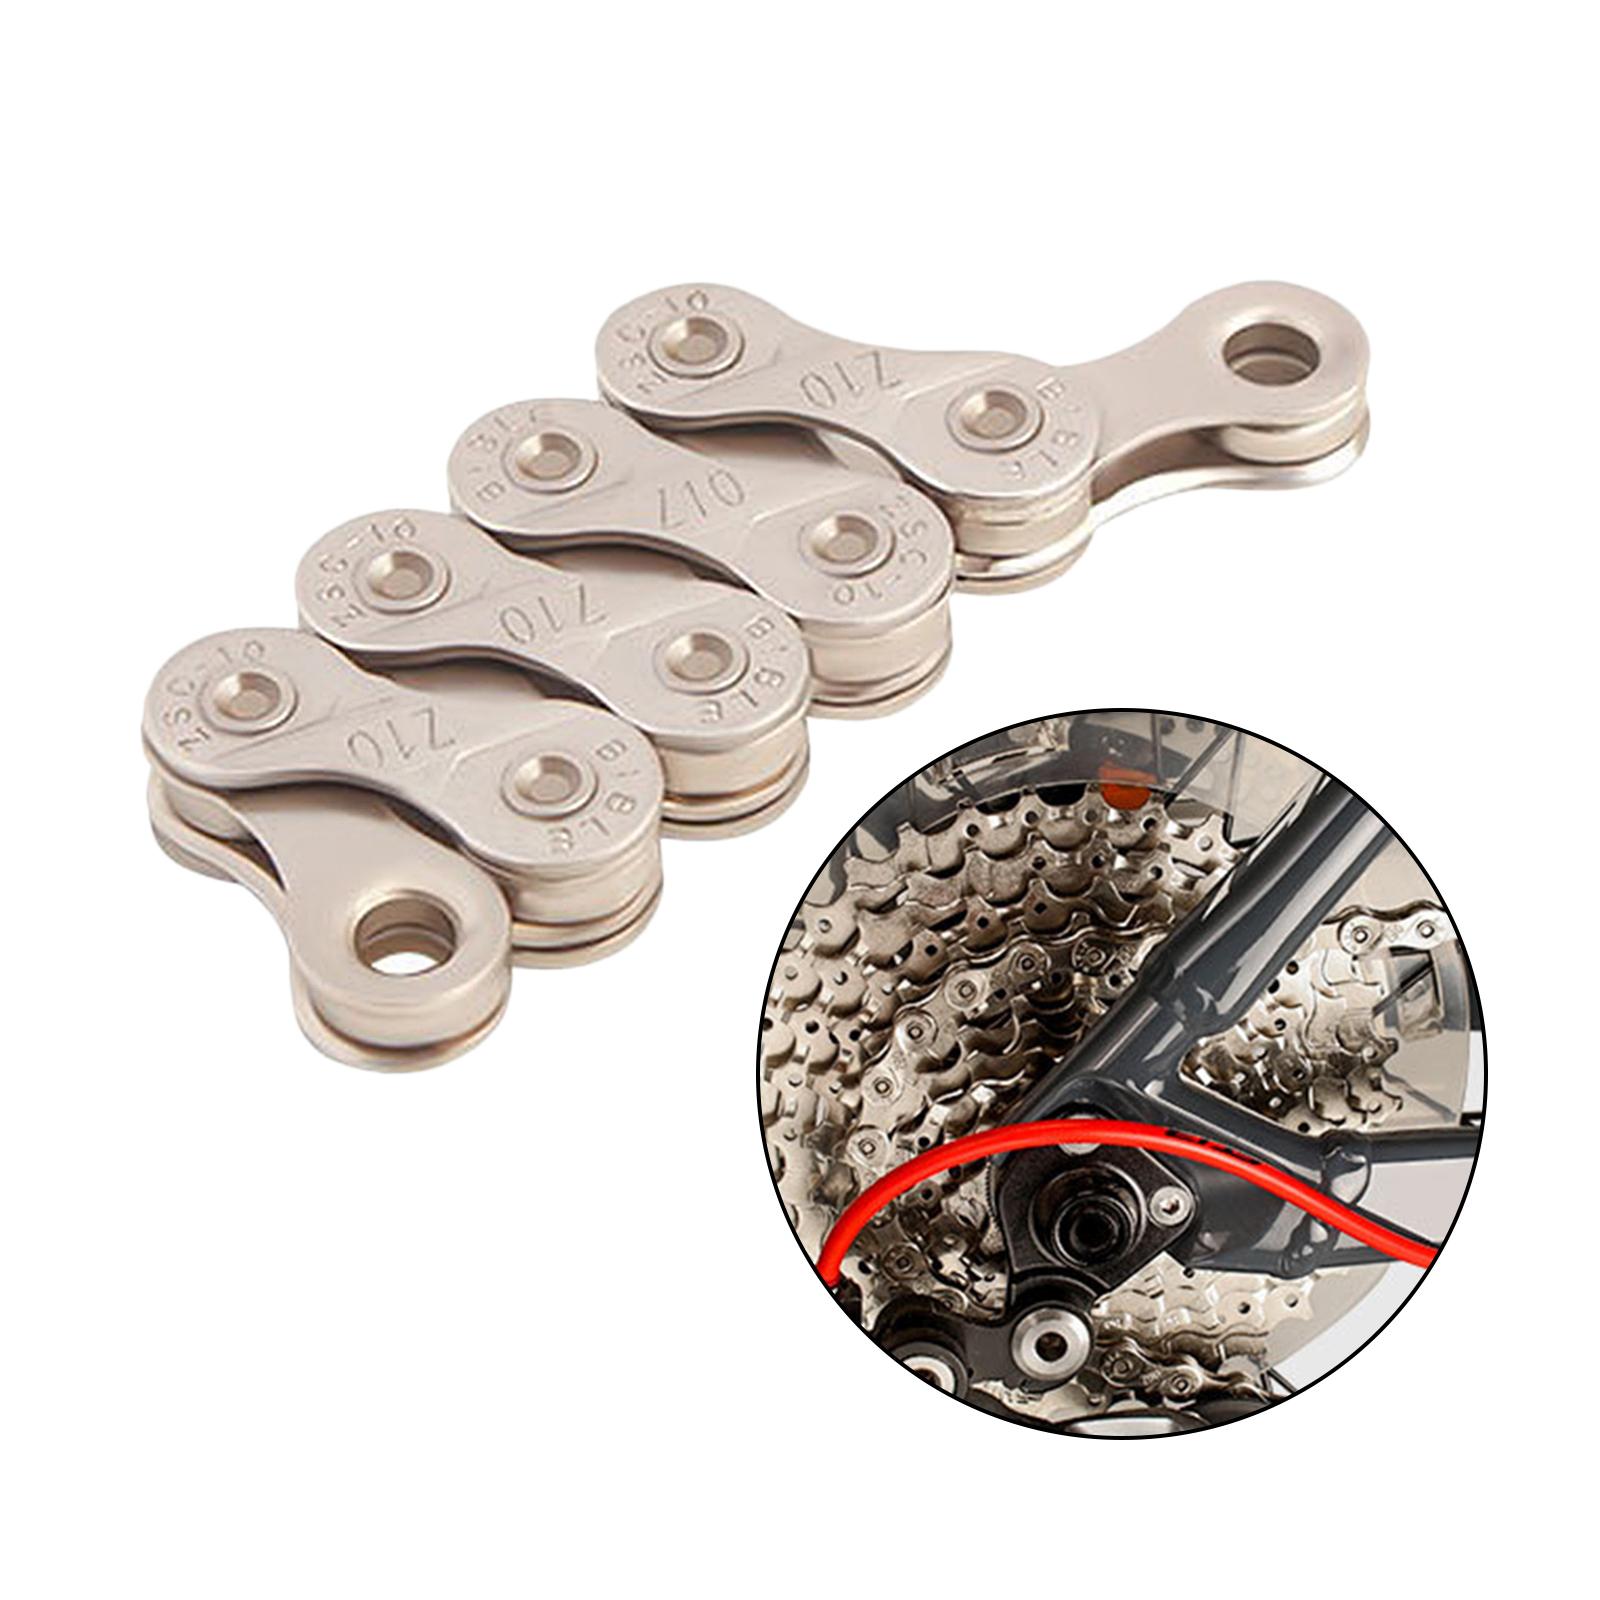 Bike Chain Mountain Bicycle Repair Chains Link Connector Joiner 10S